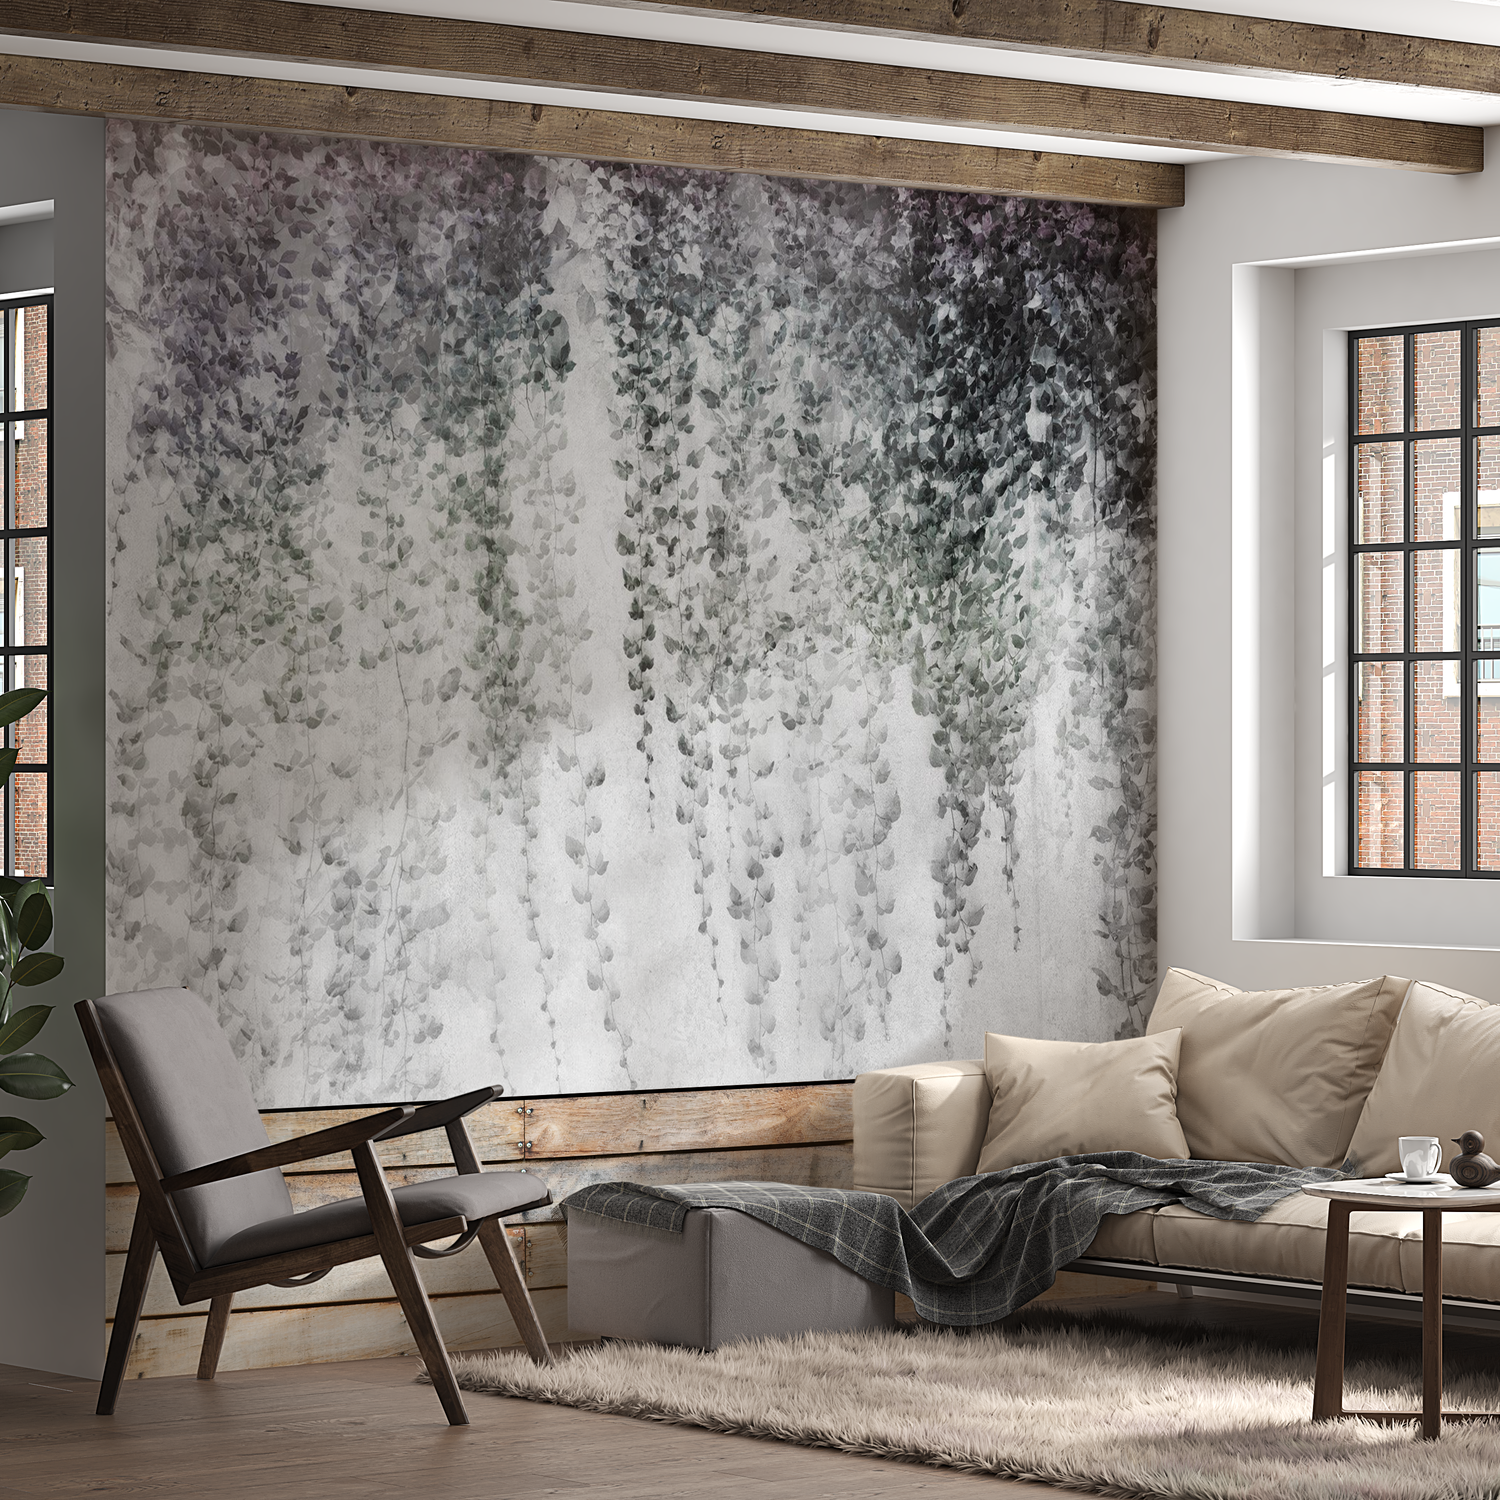 Peel & Stick Botanical Wall Mural - Peaceful Grey Oasis - Removable Wallpaper 38"Wx27"H